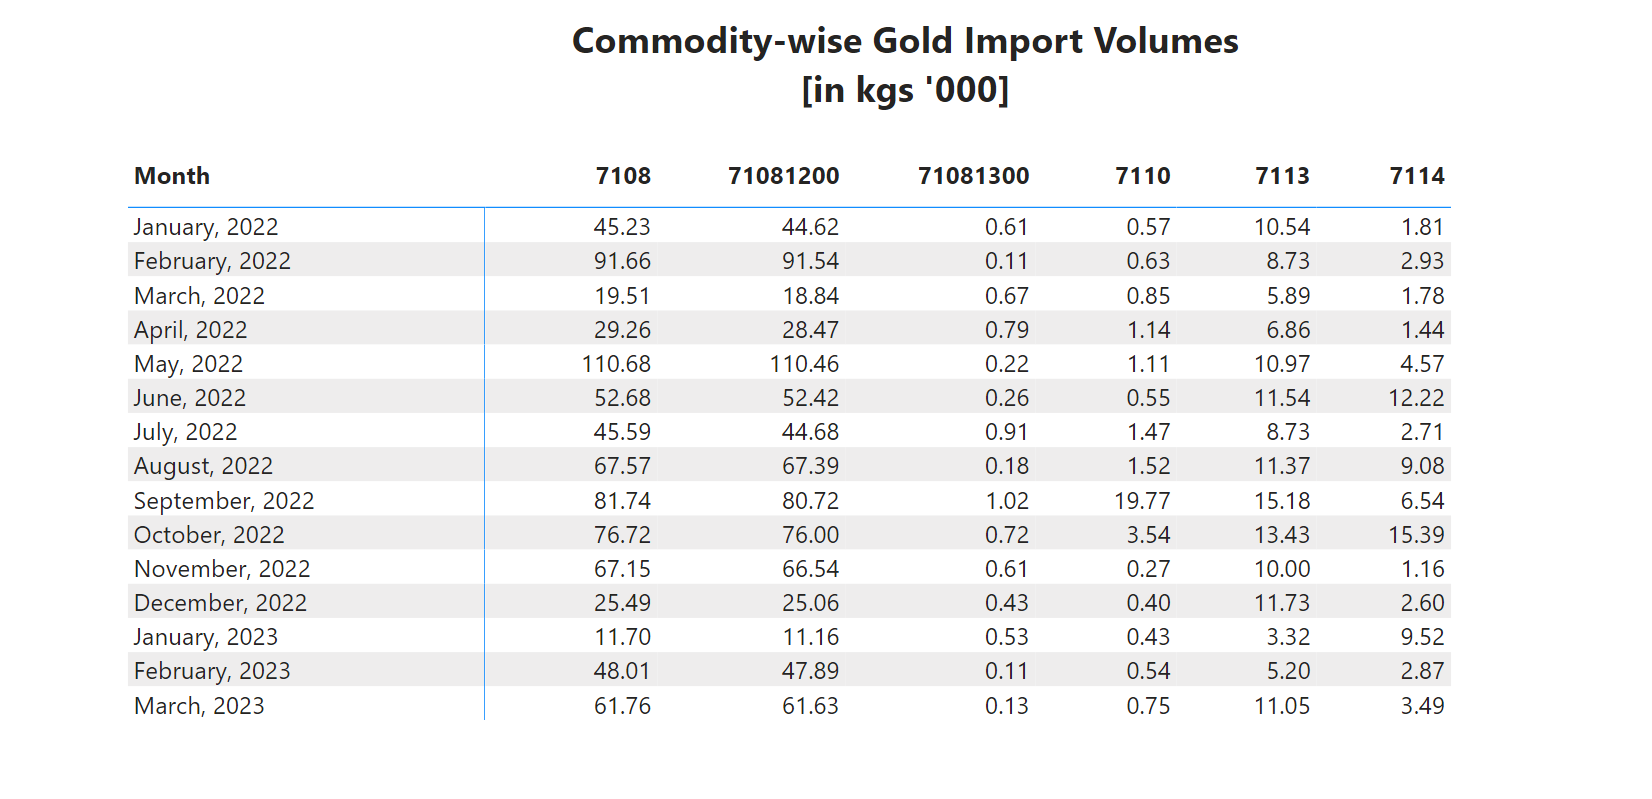 Commodity-wise Gold Import Volumes